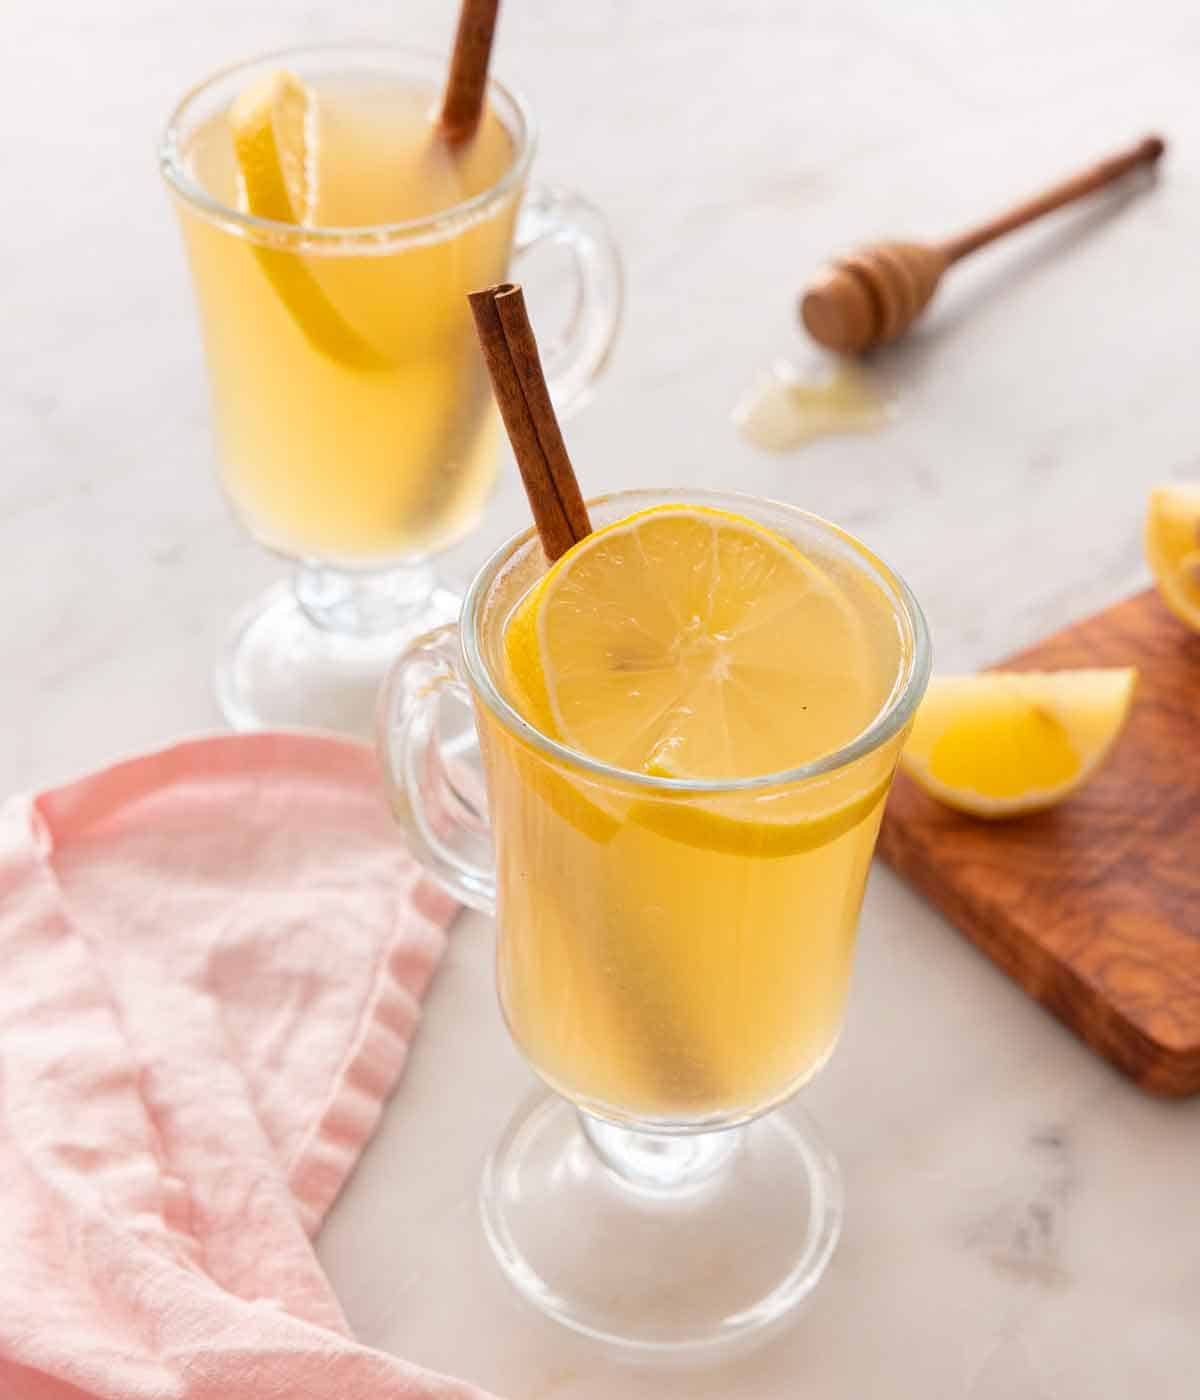 Two cups of hot toddies with lemon and cinnamon stick in the cups.